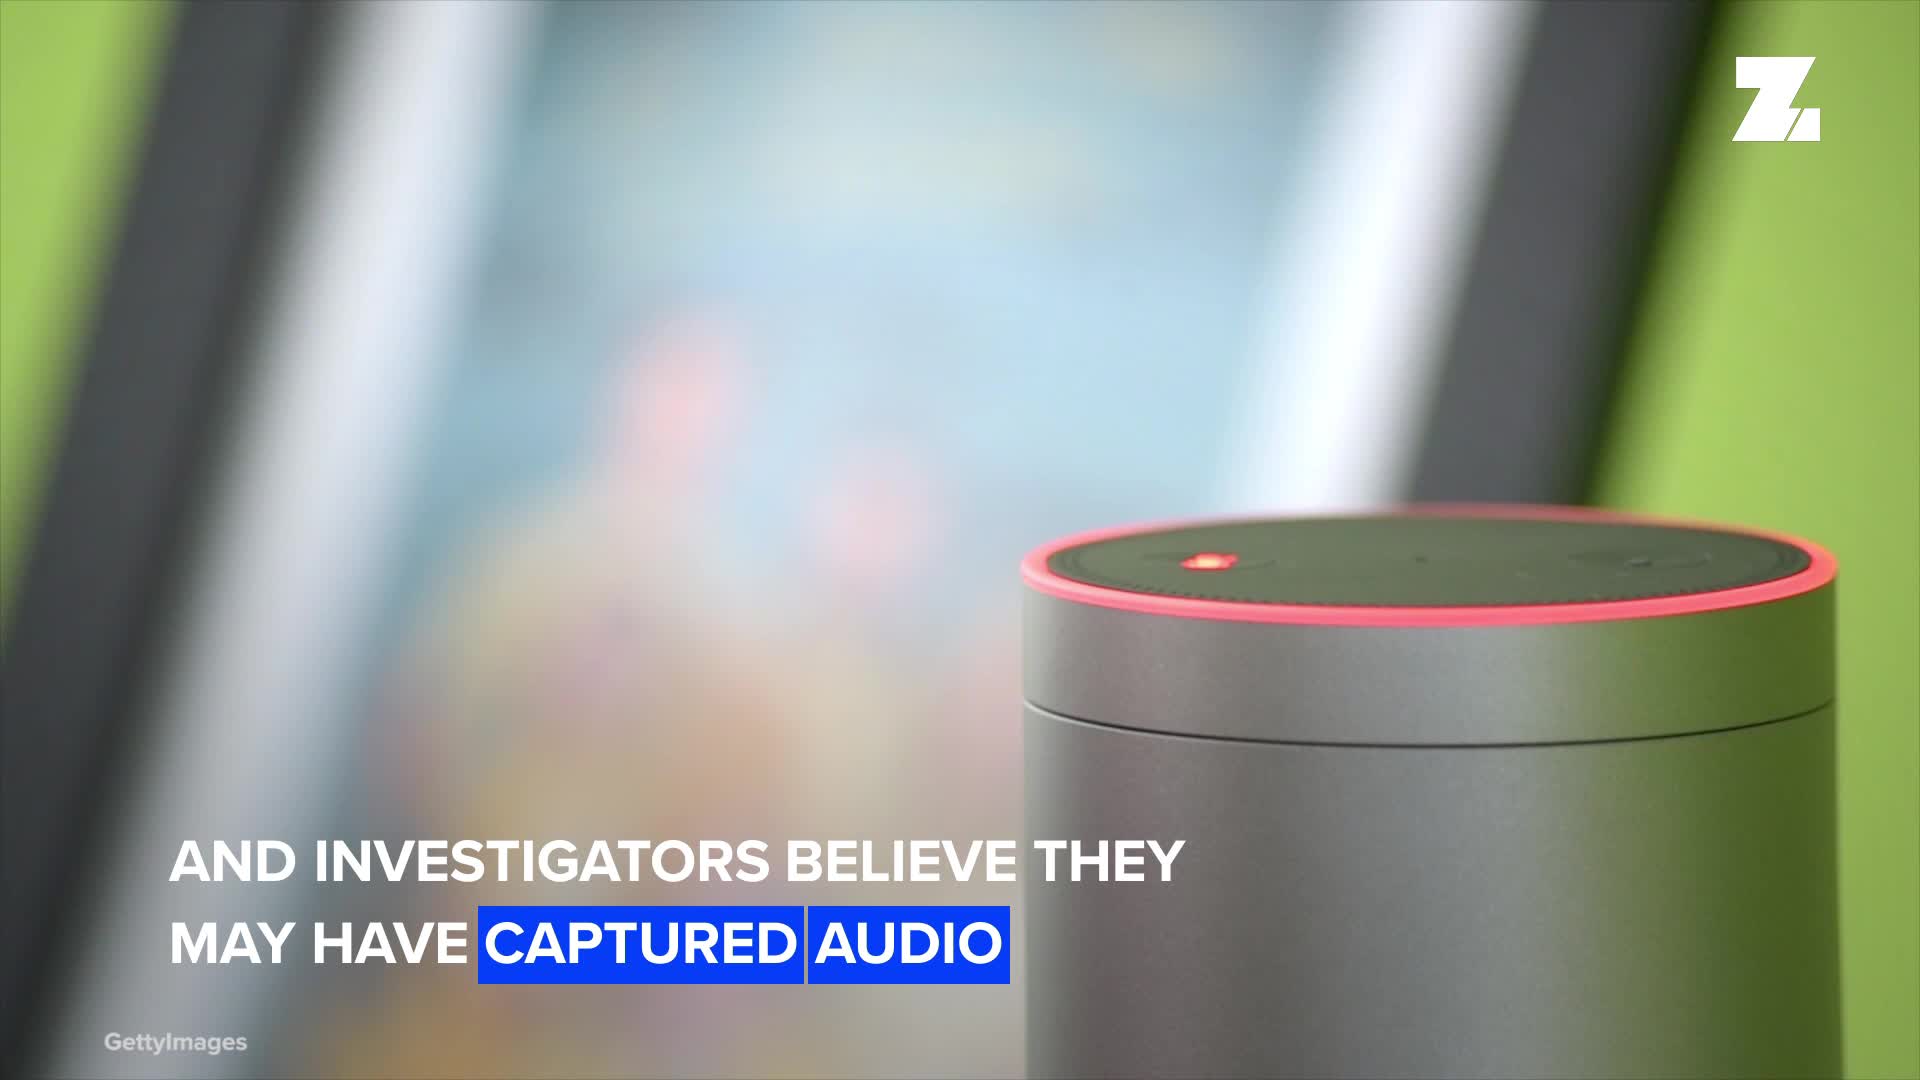 Will the Amazon Echo help solve a murder?